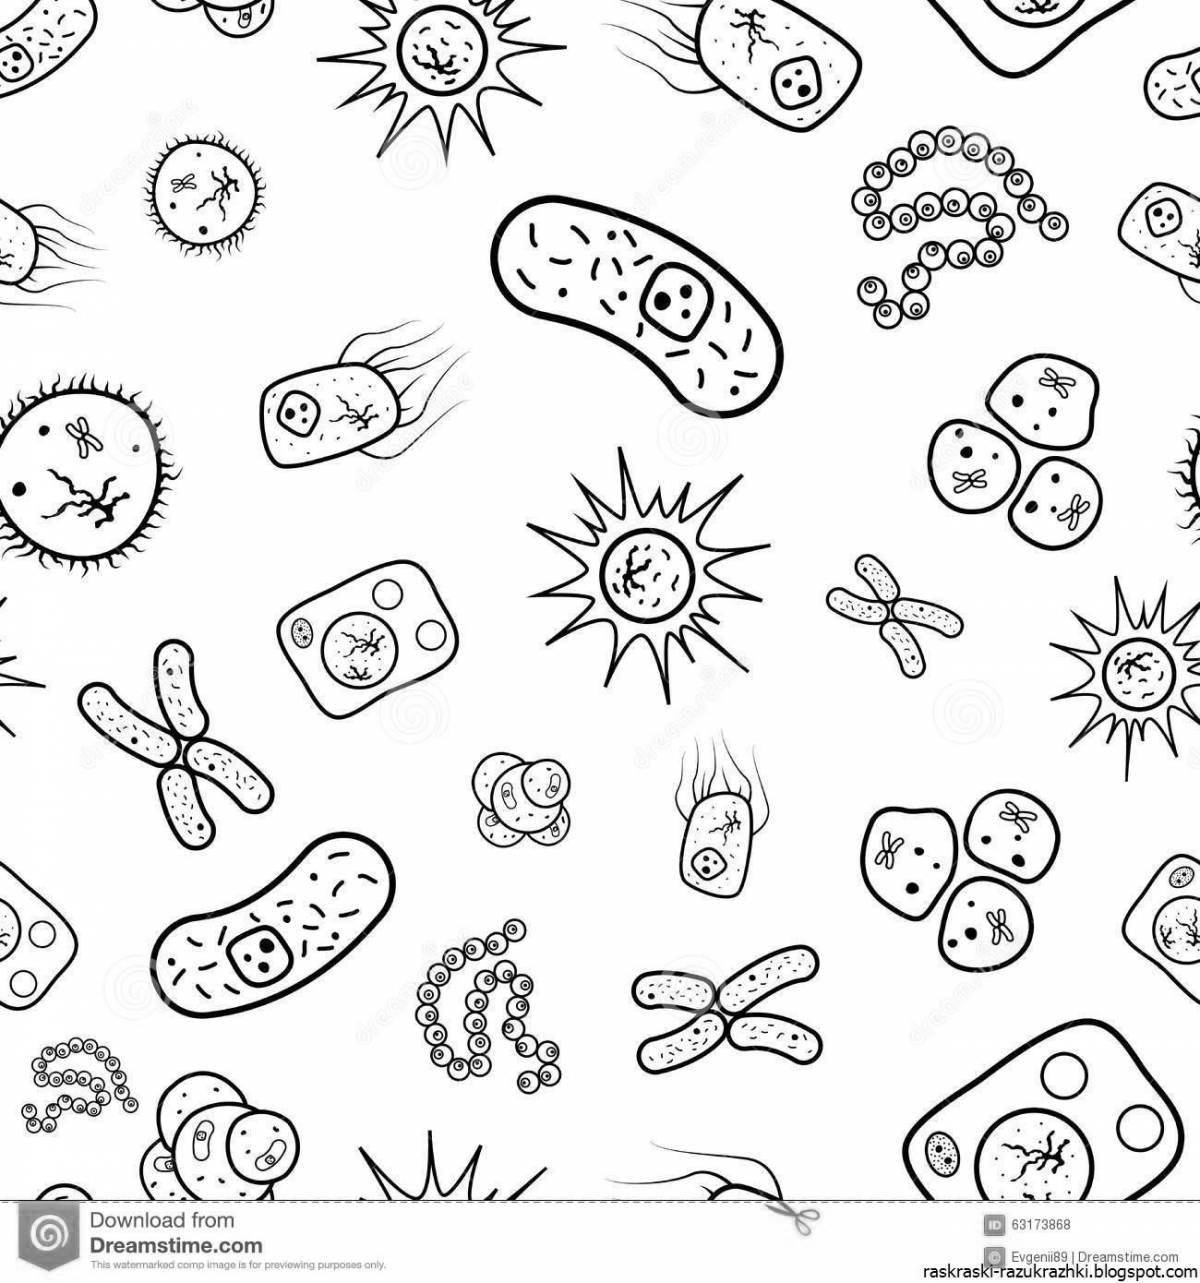 Bacteria coloring page